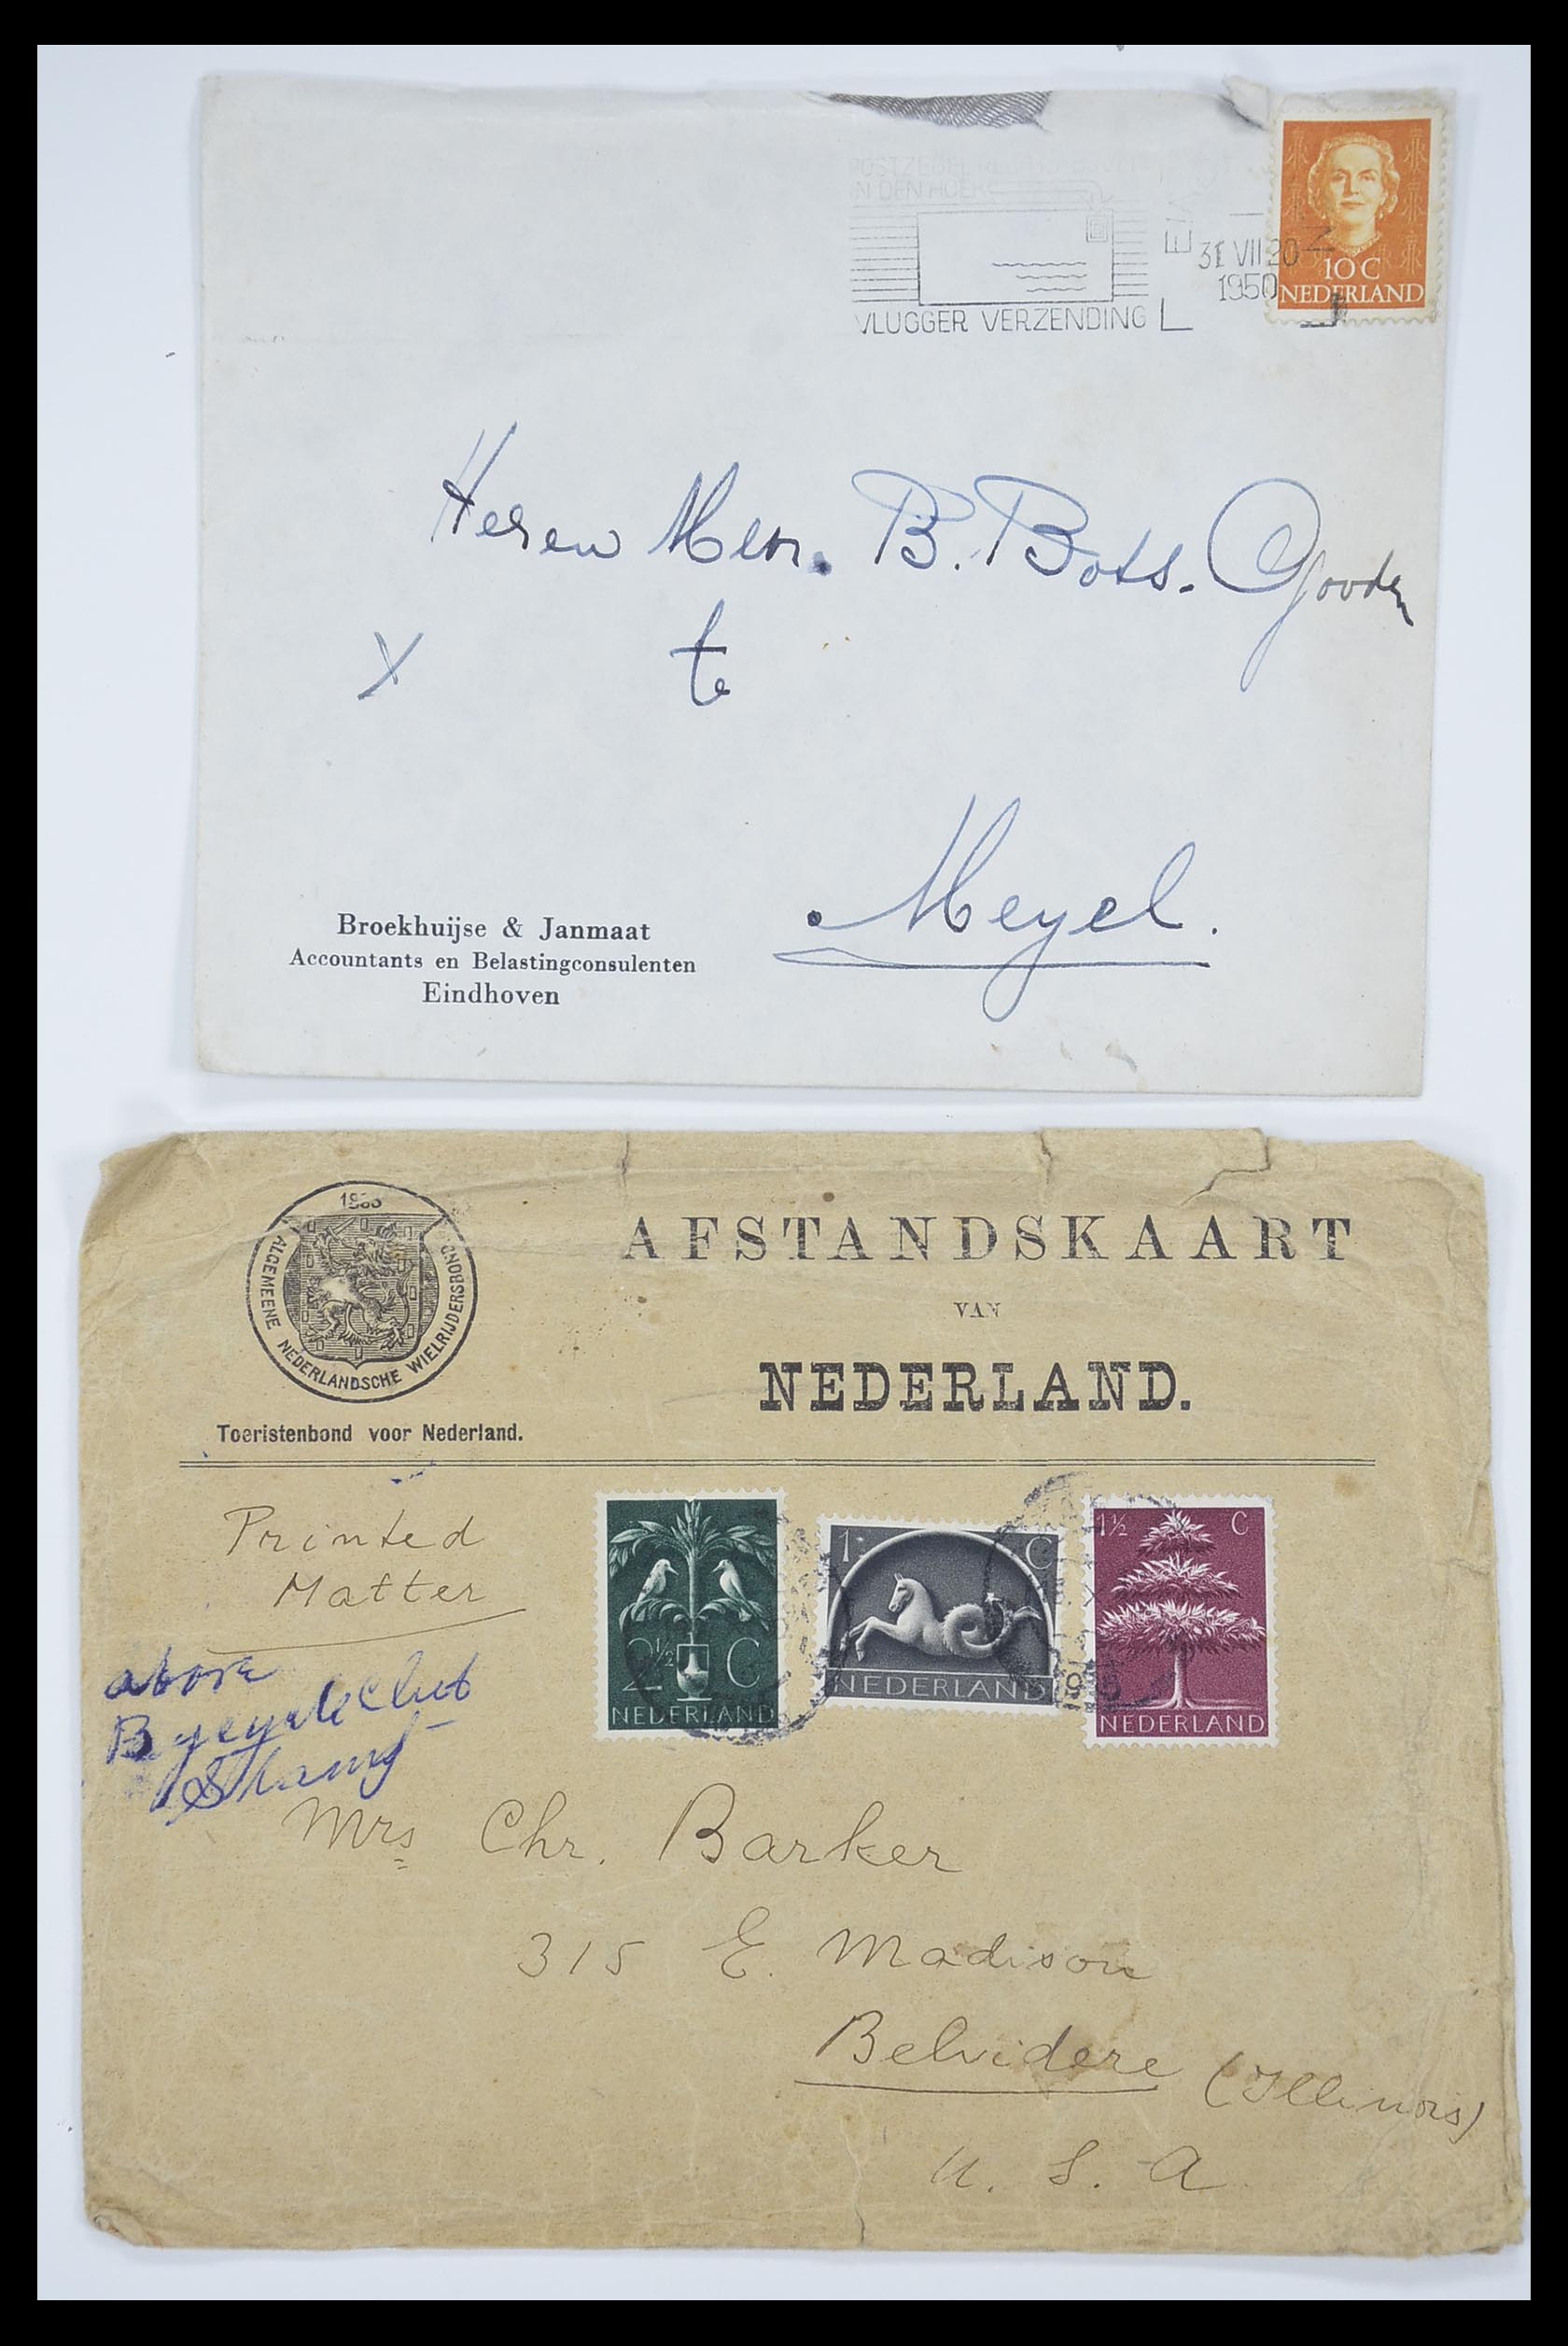 33536 073 - Stamp collection 33536 Netherlands covers 1800-1950.